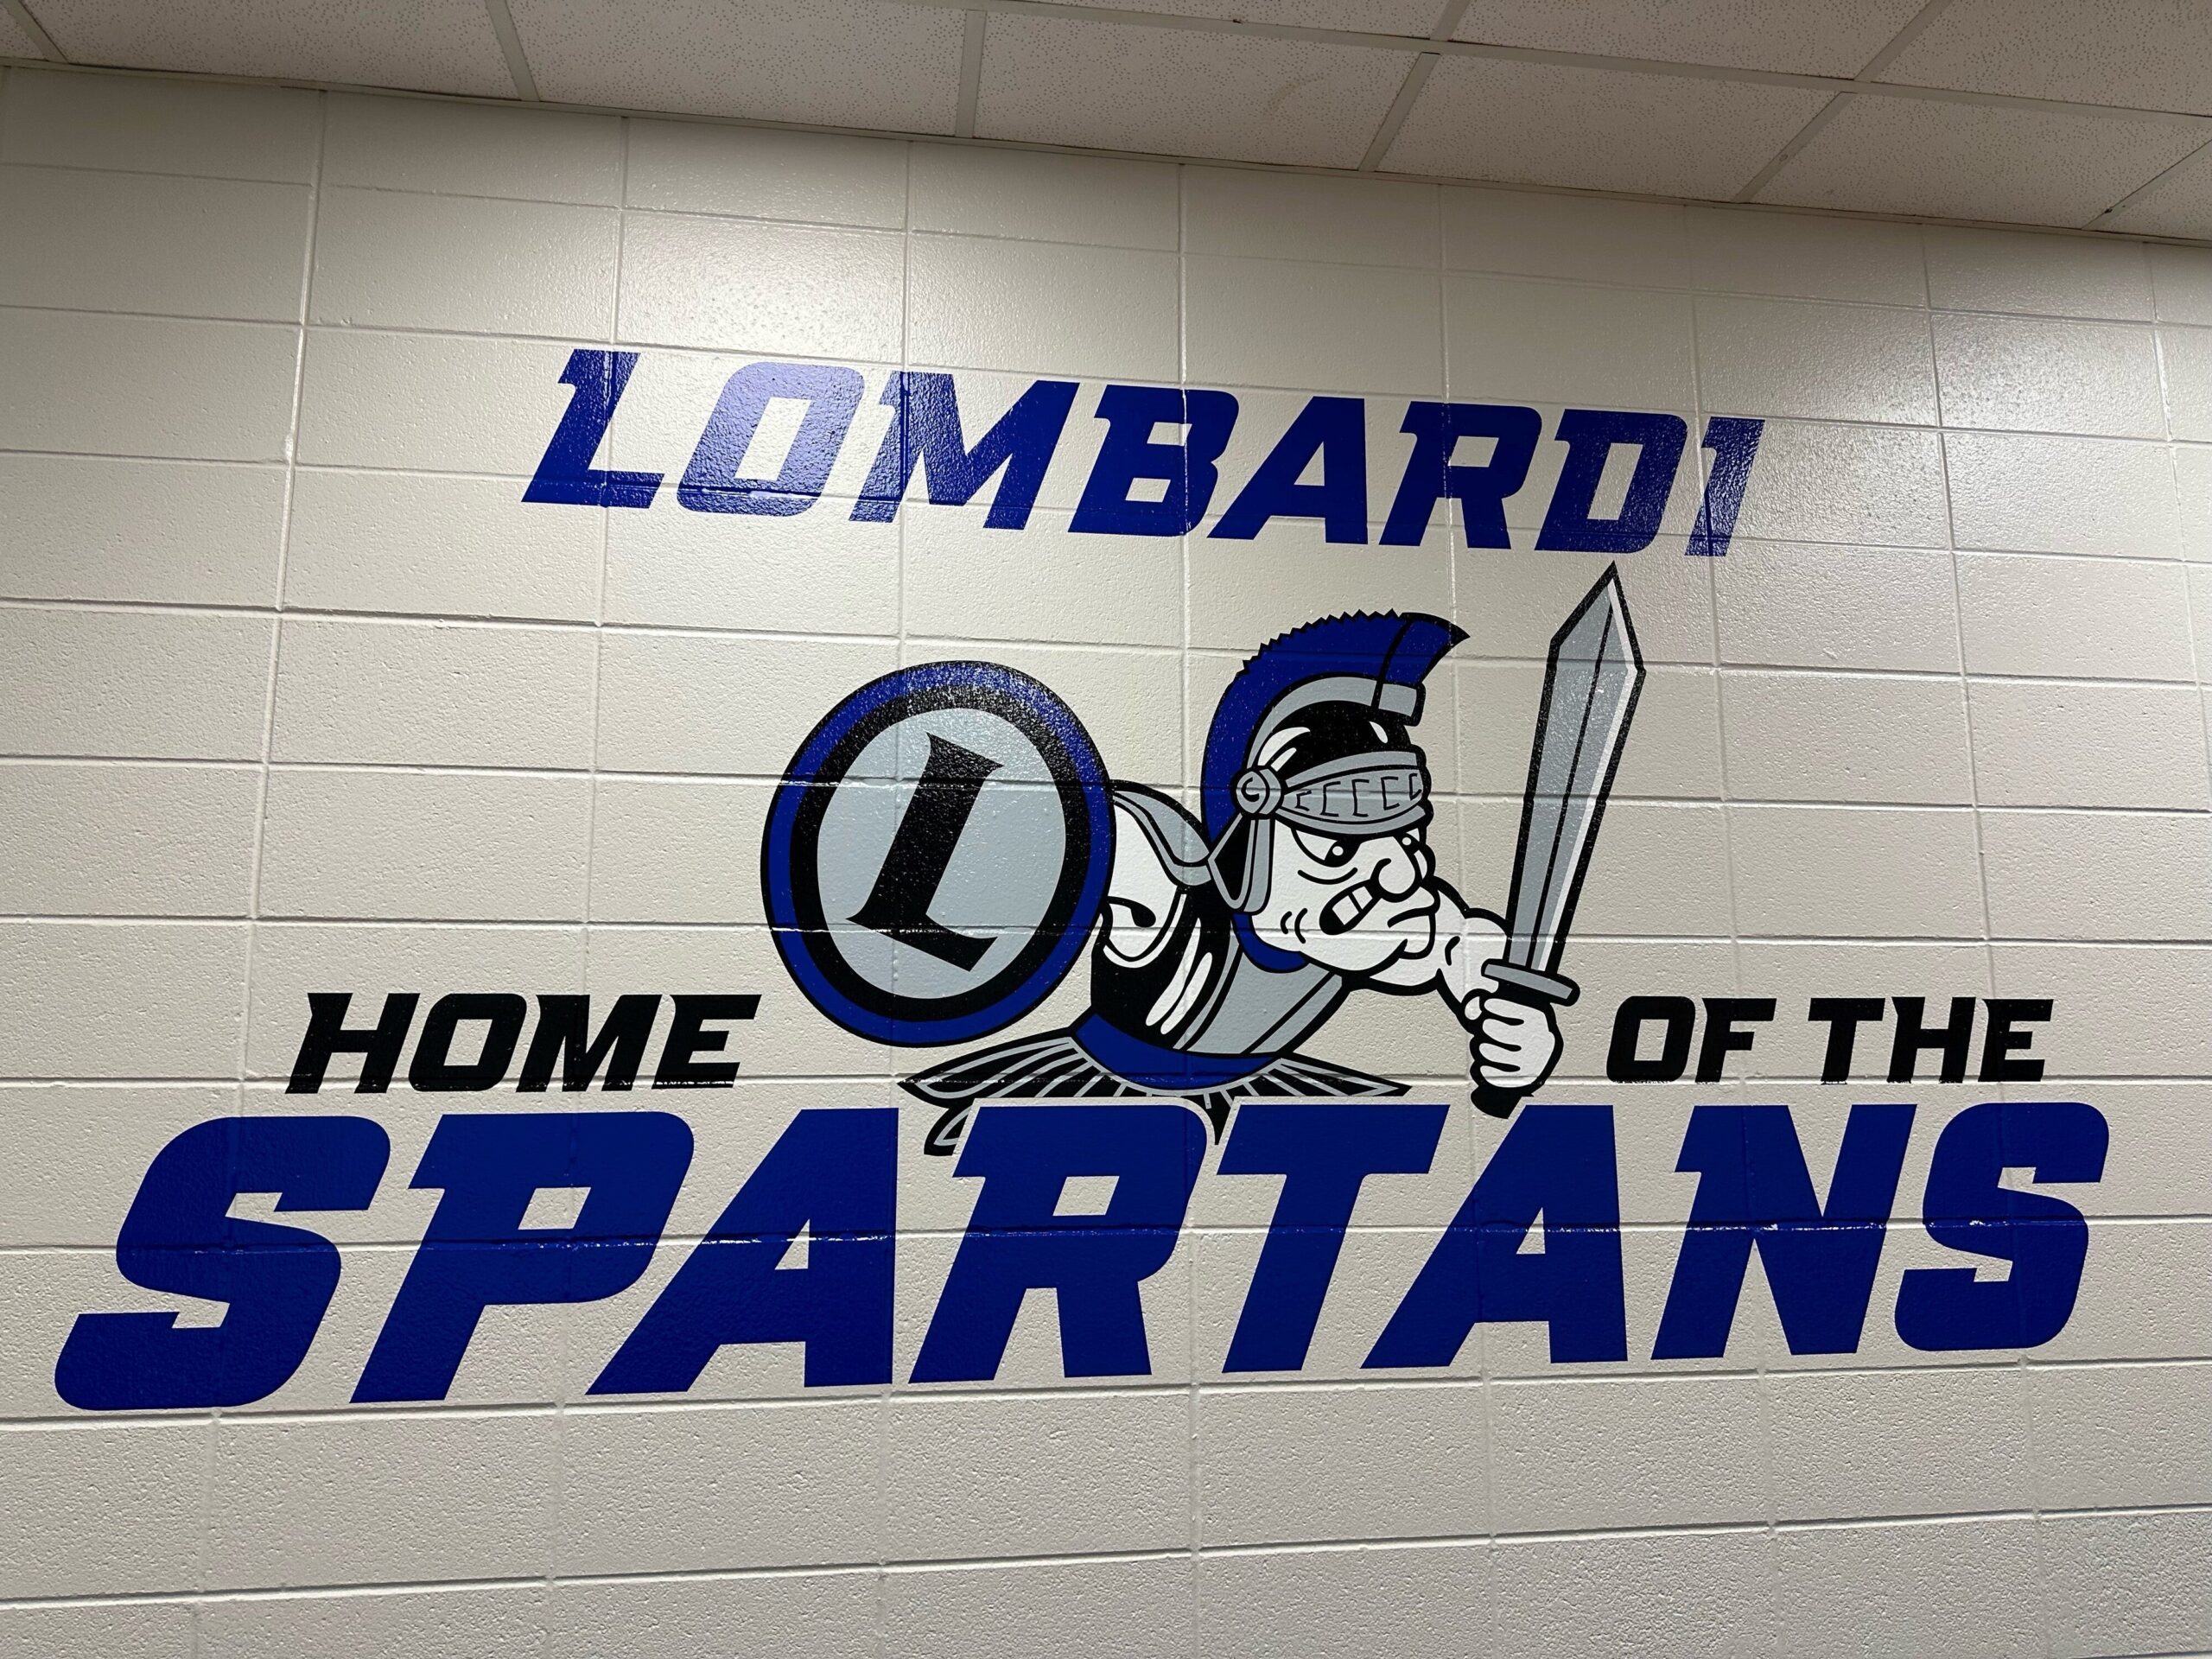 A decorated wall showing the name Lombardi Middle School and their mascot, the Spartans